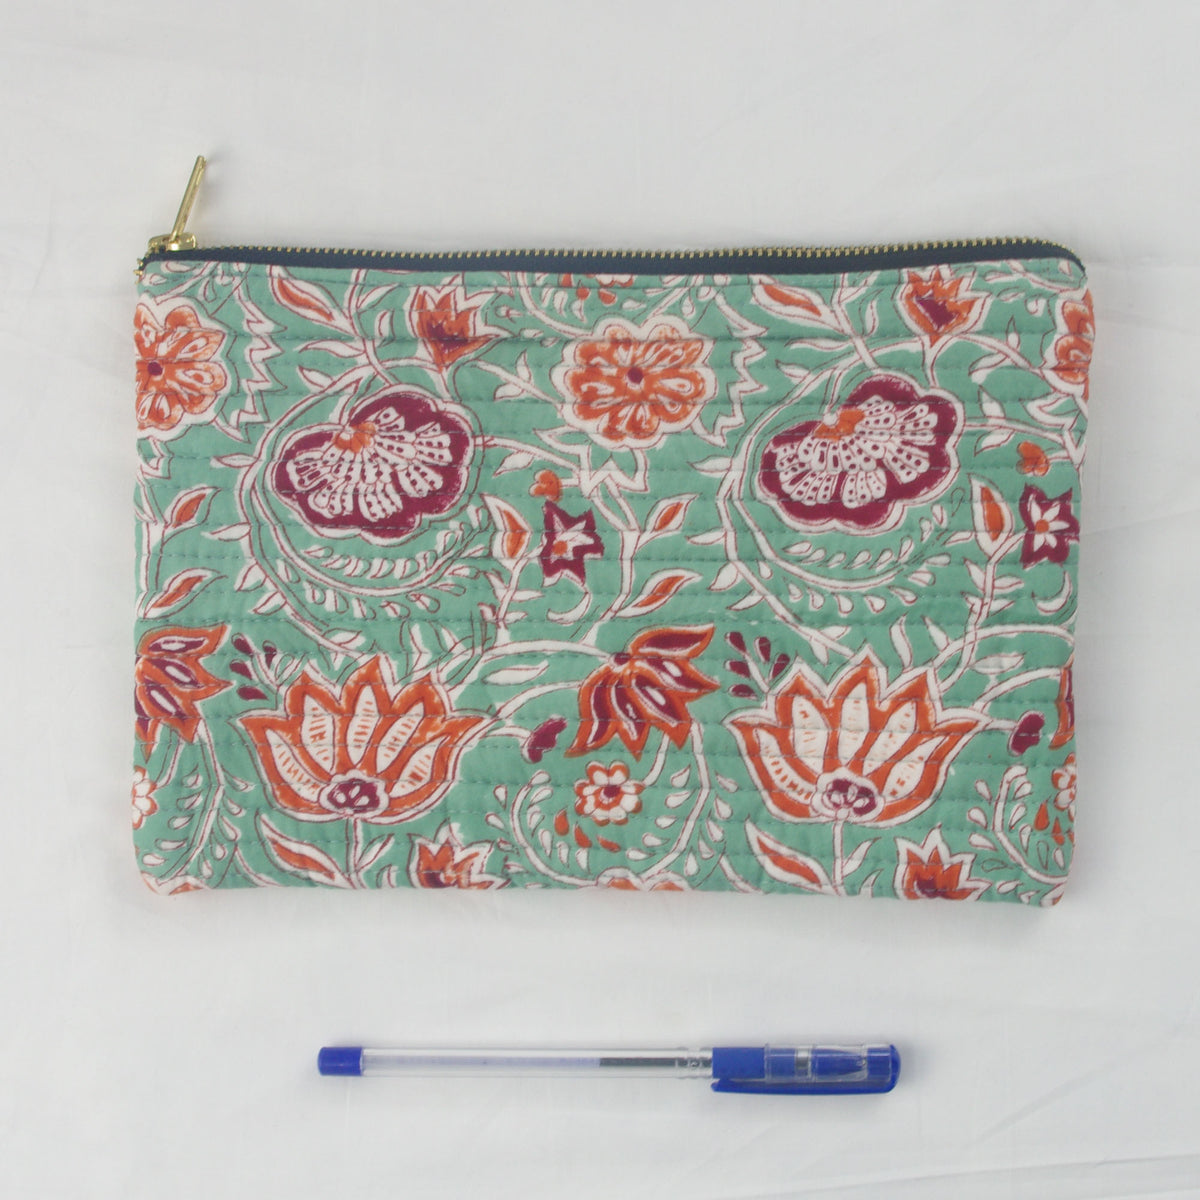 Floral Indian Hand Block Print Quilted Pouch Designer Toiletry Bag 3 Piece  Set